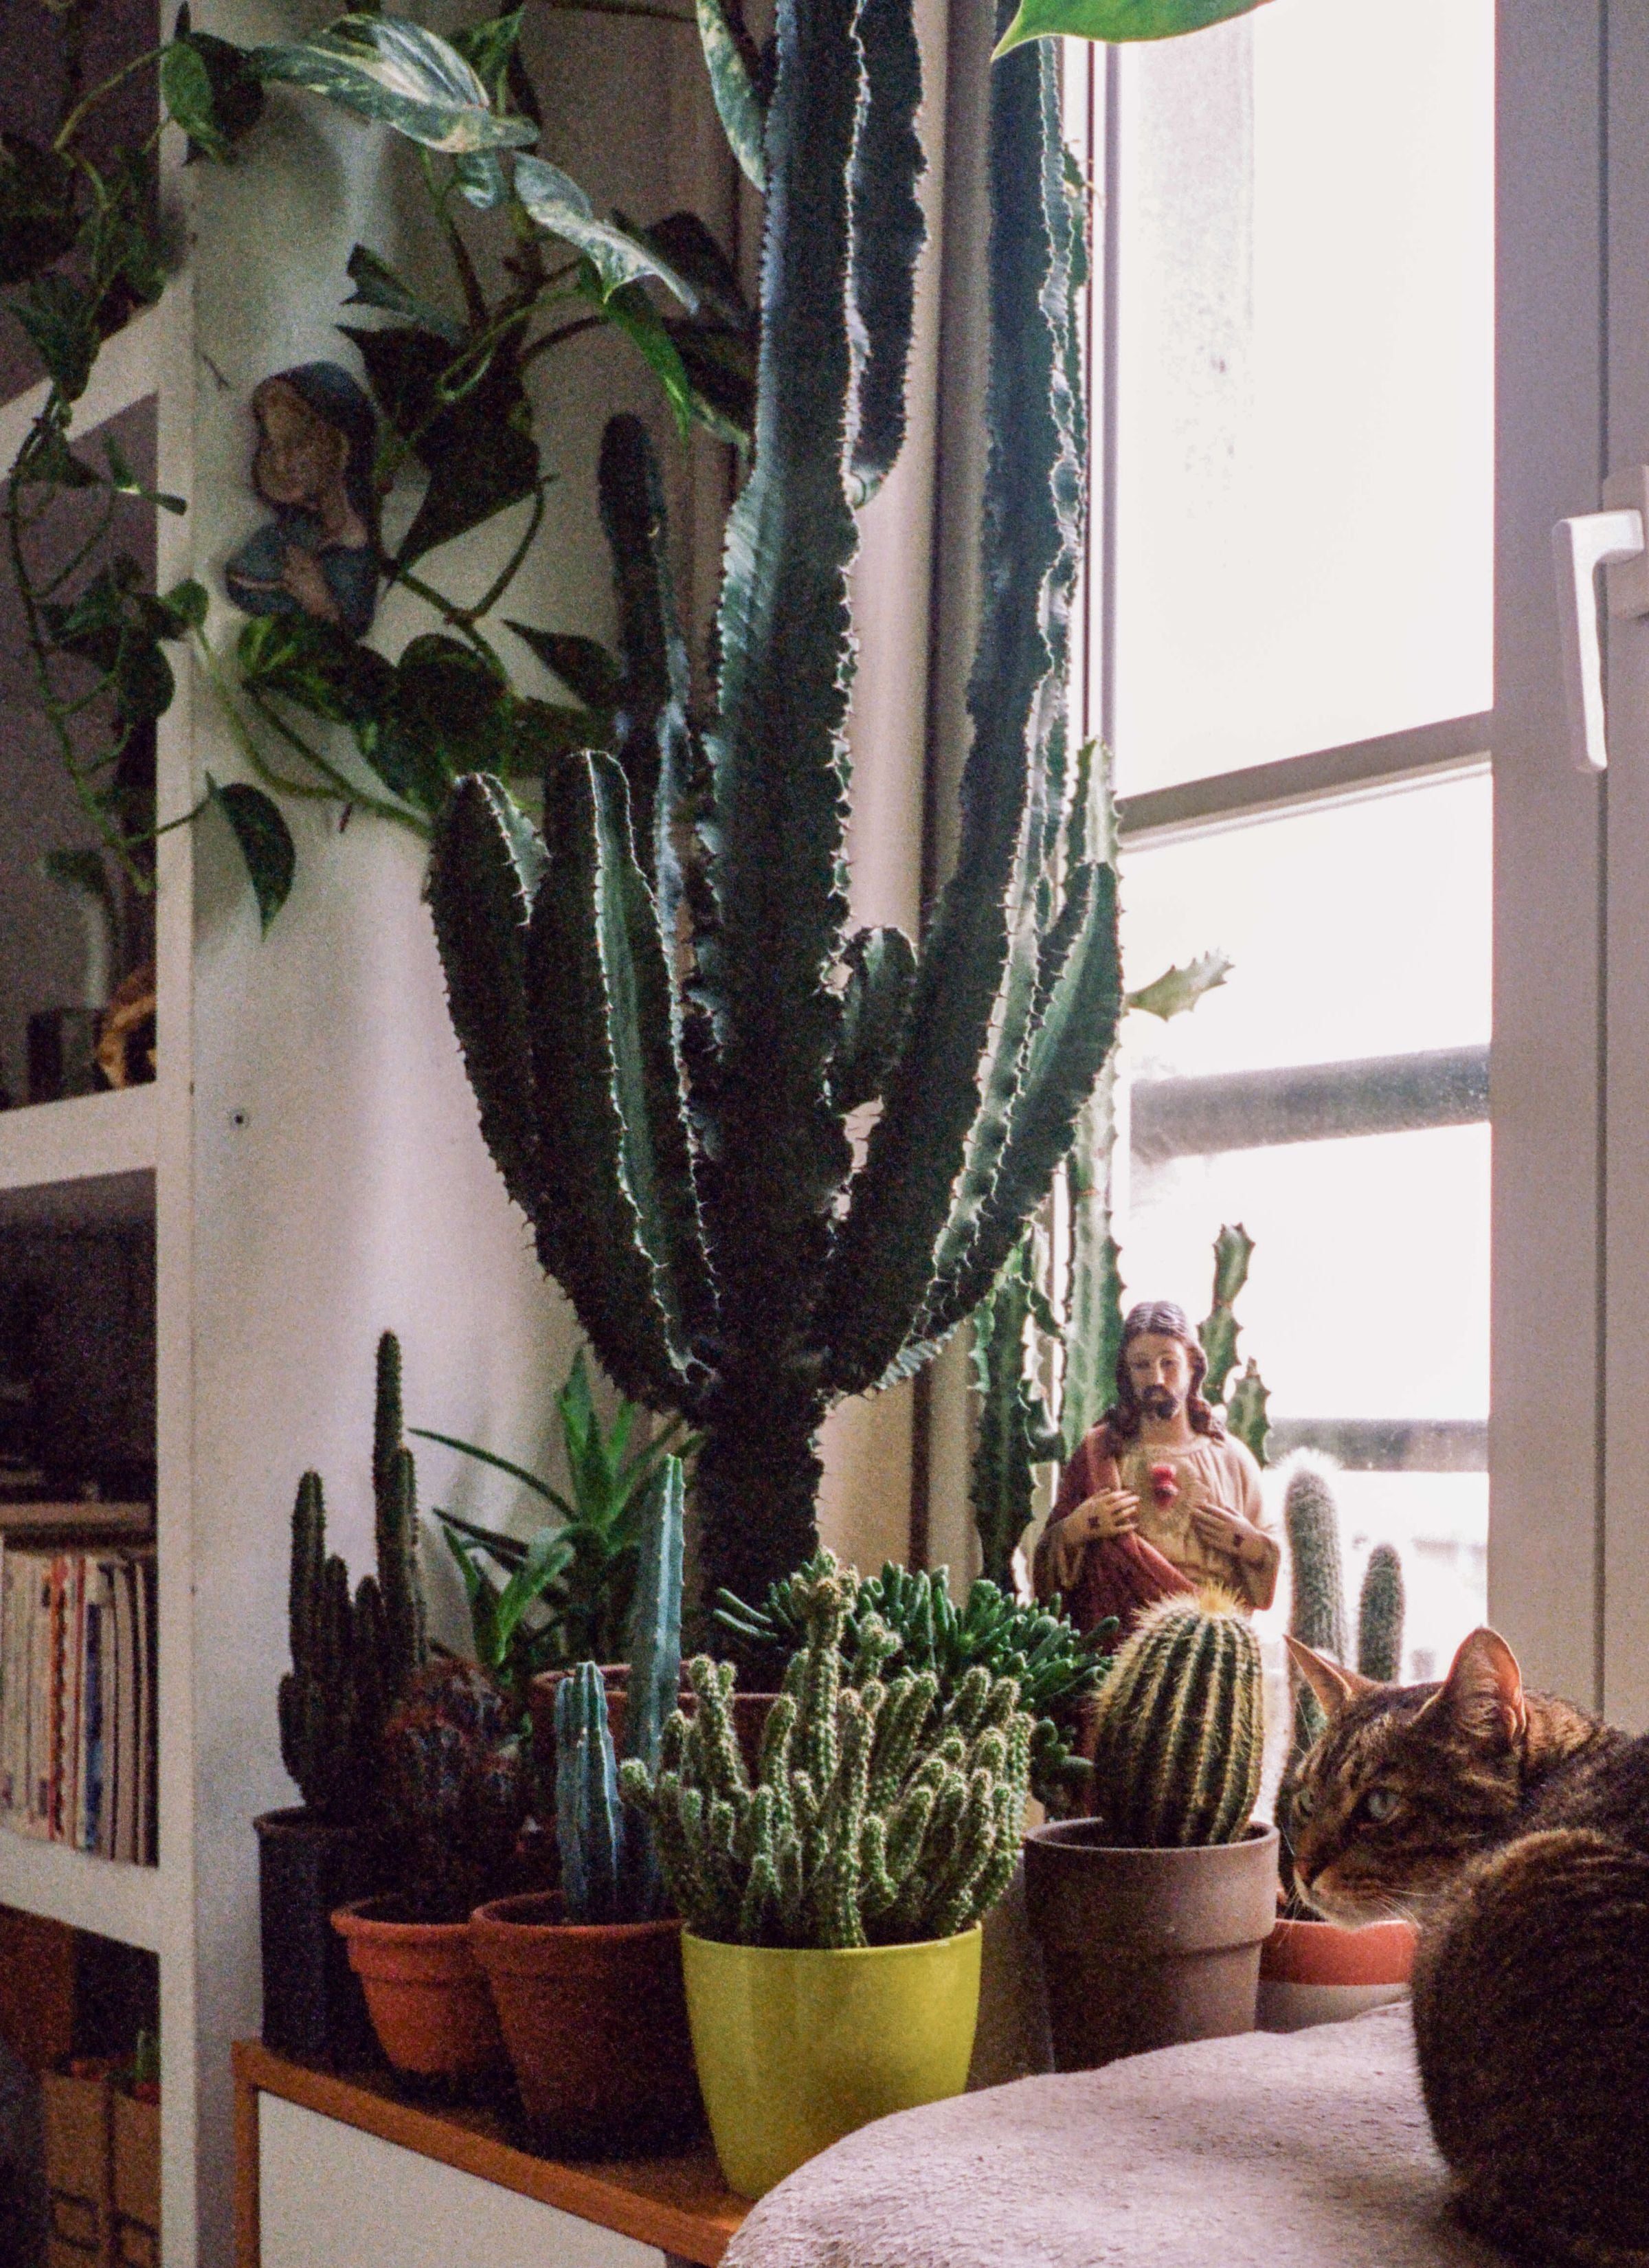 A large potted cactus commands attention atop a cupboard filled with a diverse collection of smaller cacti, situated next to a window. Among the assortment of potted plants stands a colorful statue of Jesus, adding a spiritual element to the display. A contented cat rests nearby, adding a touch of coziness to the scene. This composition juxtaposes the prickly beauty of the cacti with the serenity of the religious statue and the comfort of the cat, creating a harmonious and visually interesting vignette.